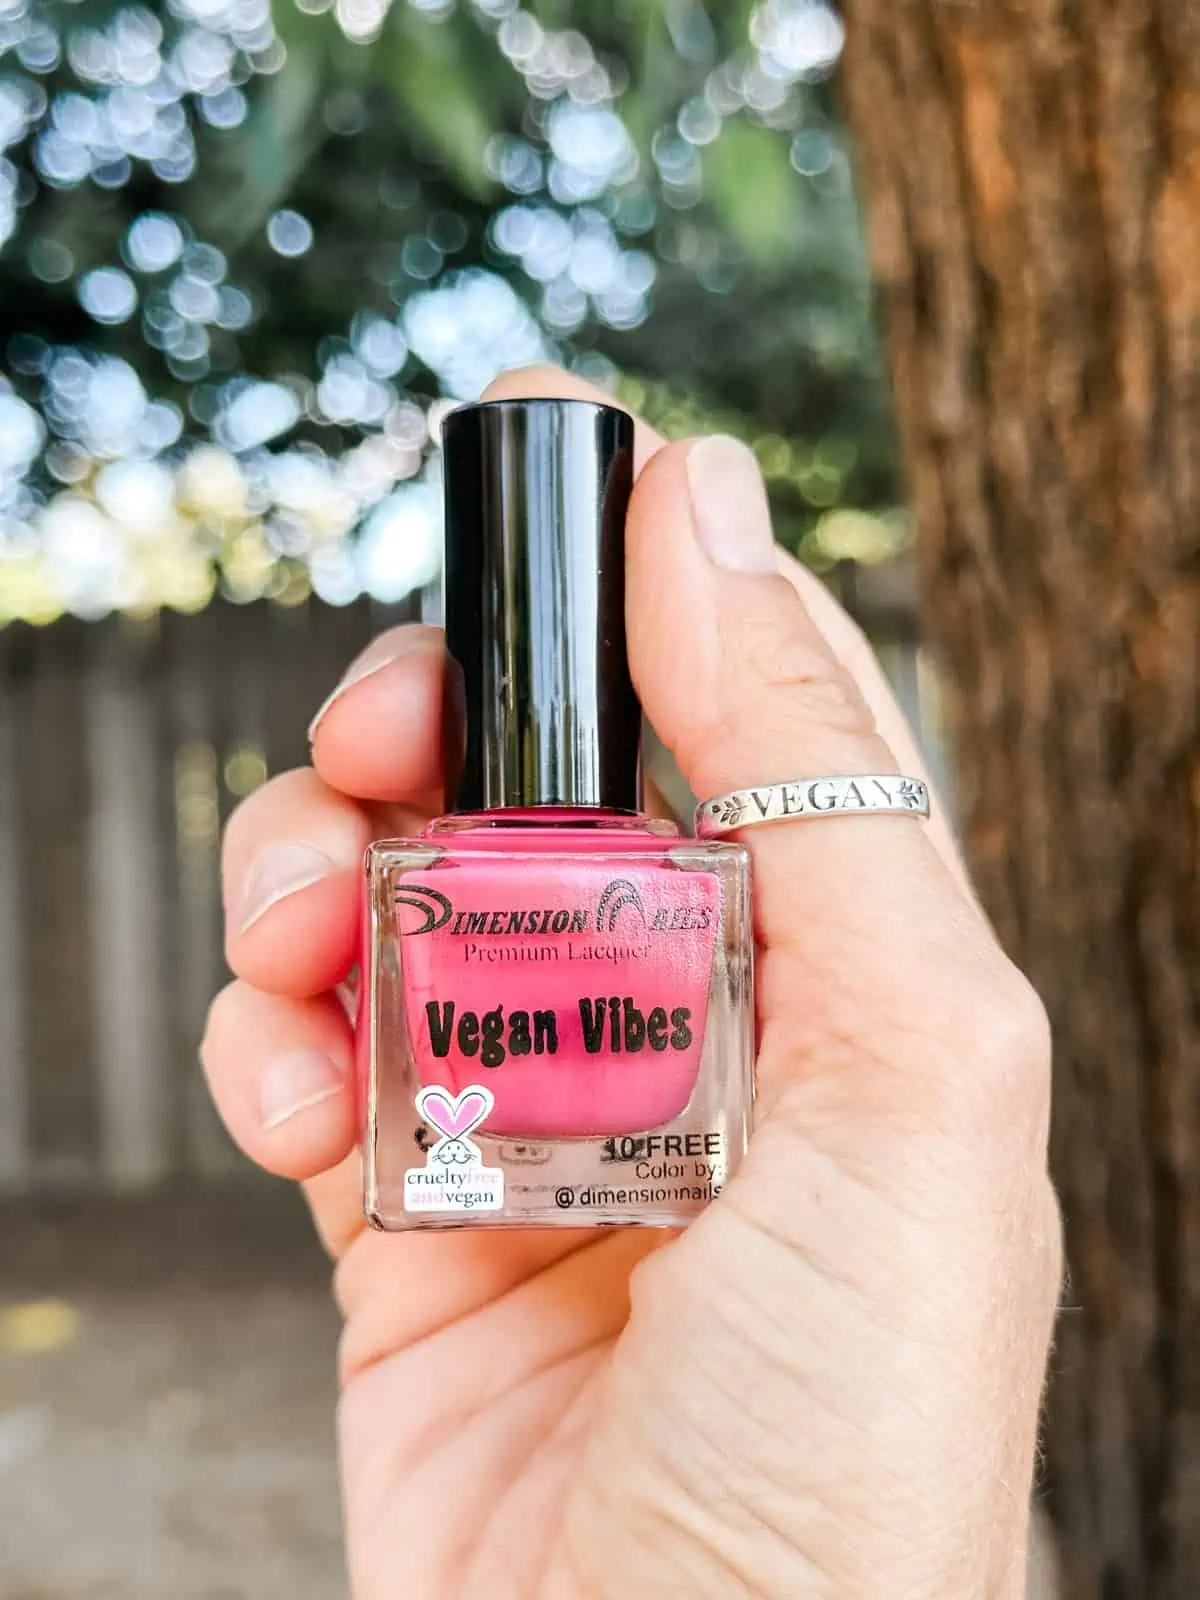 Bottle of pink vegan nail polish from Dimension Nails with the cruelty-free bunny logo. 